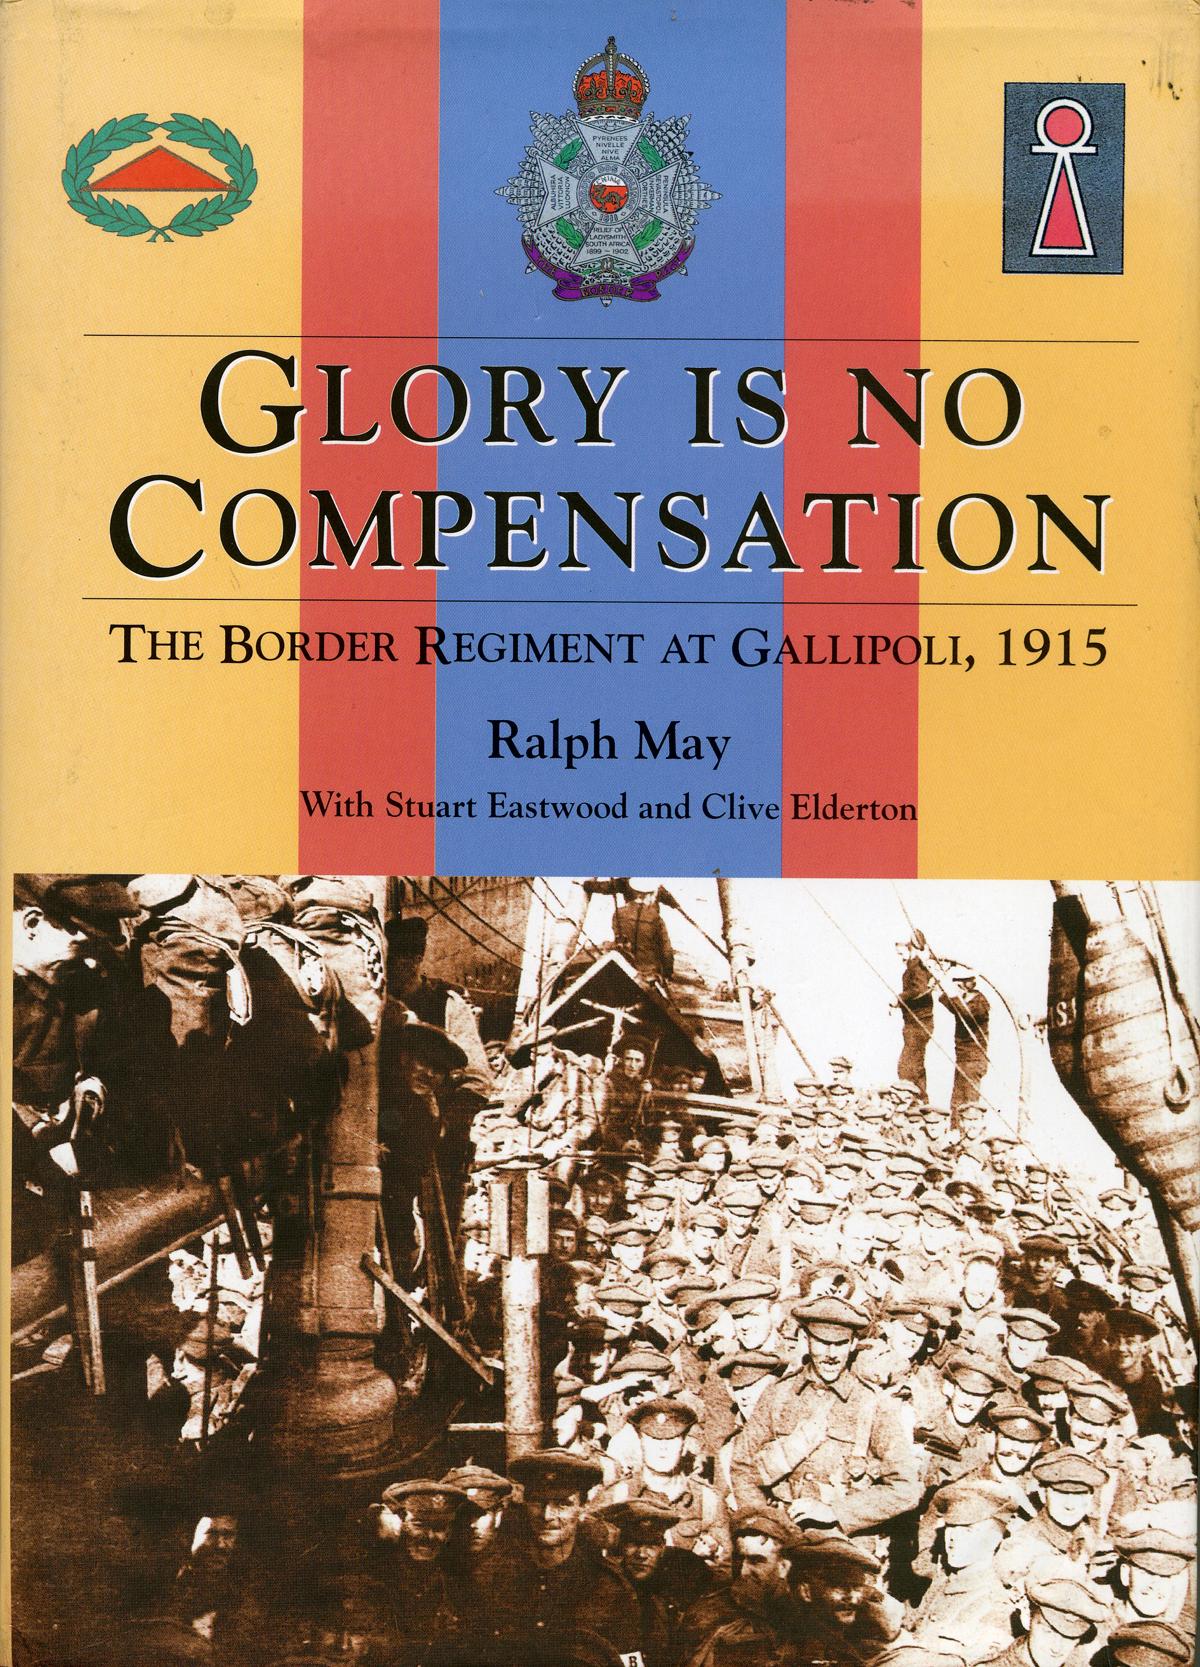 The book which tells the story of the Border Regiment's role in the ill-fated Gallipoli landings